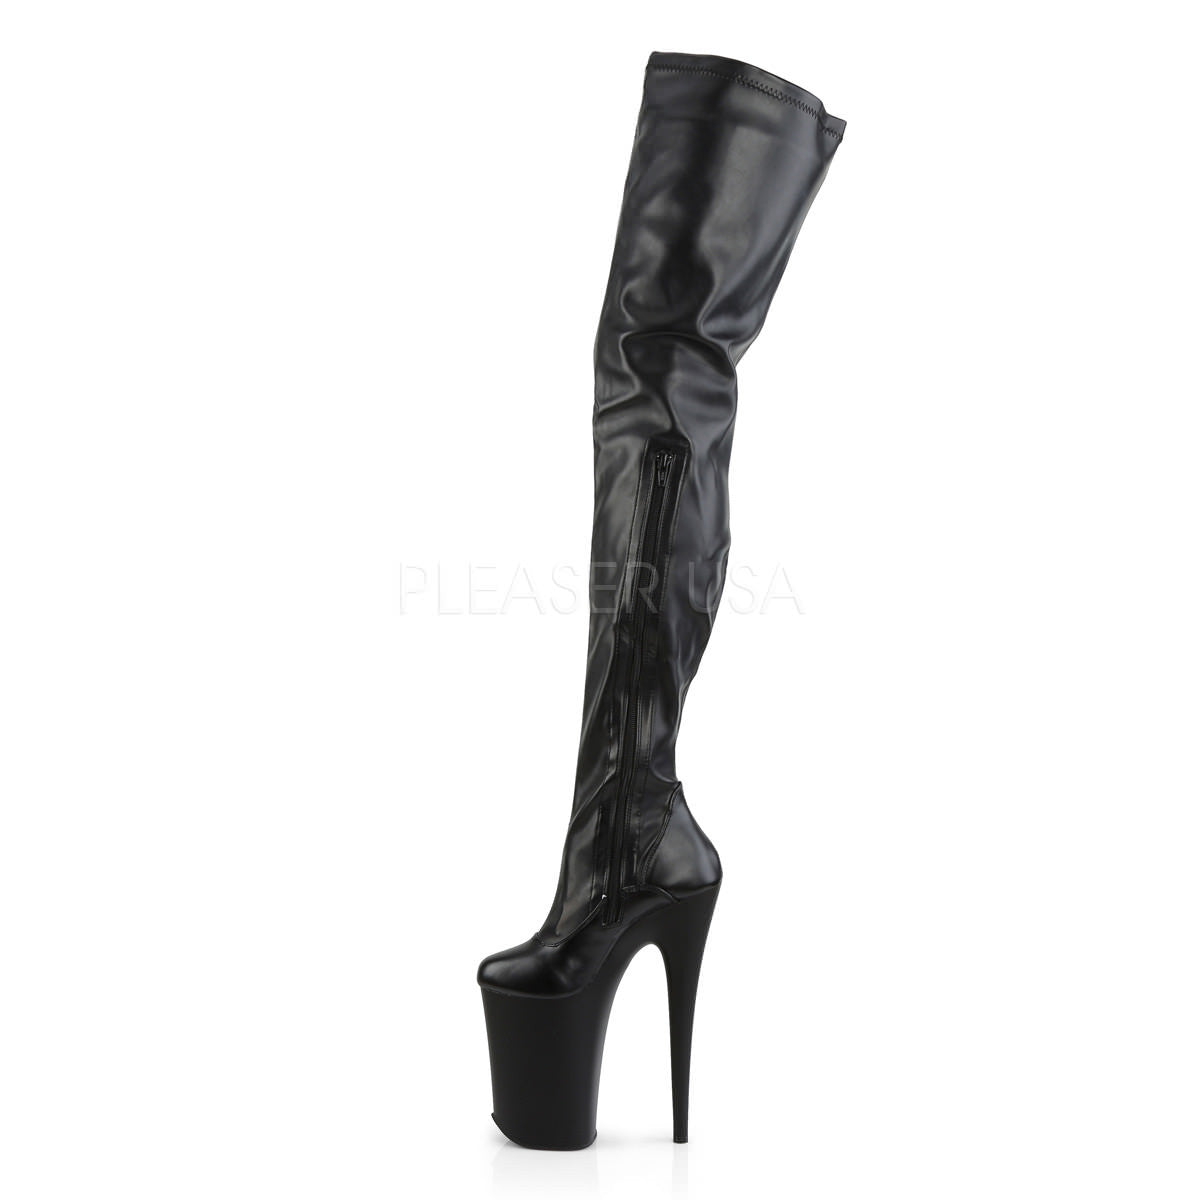 PLEASER INFINITY-4000 Black 9 Inch Heel Stretch Crotch Boots